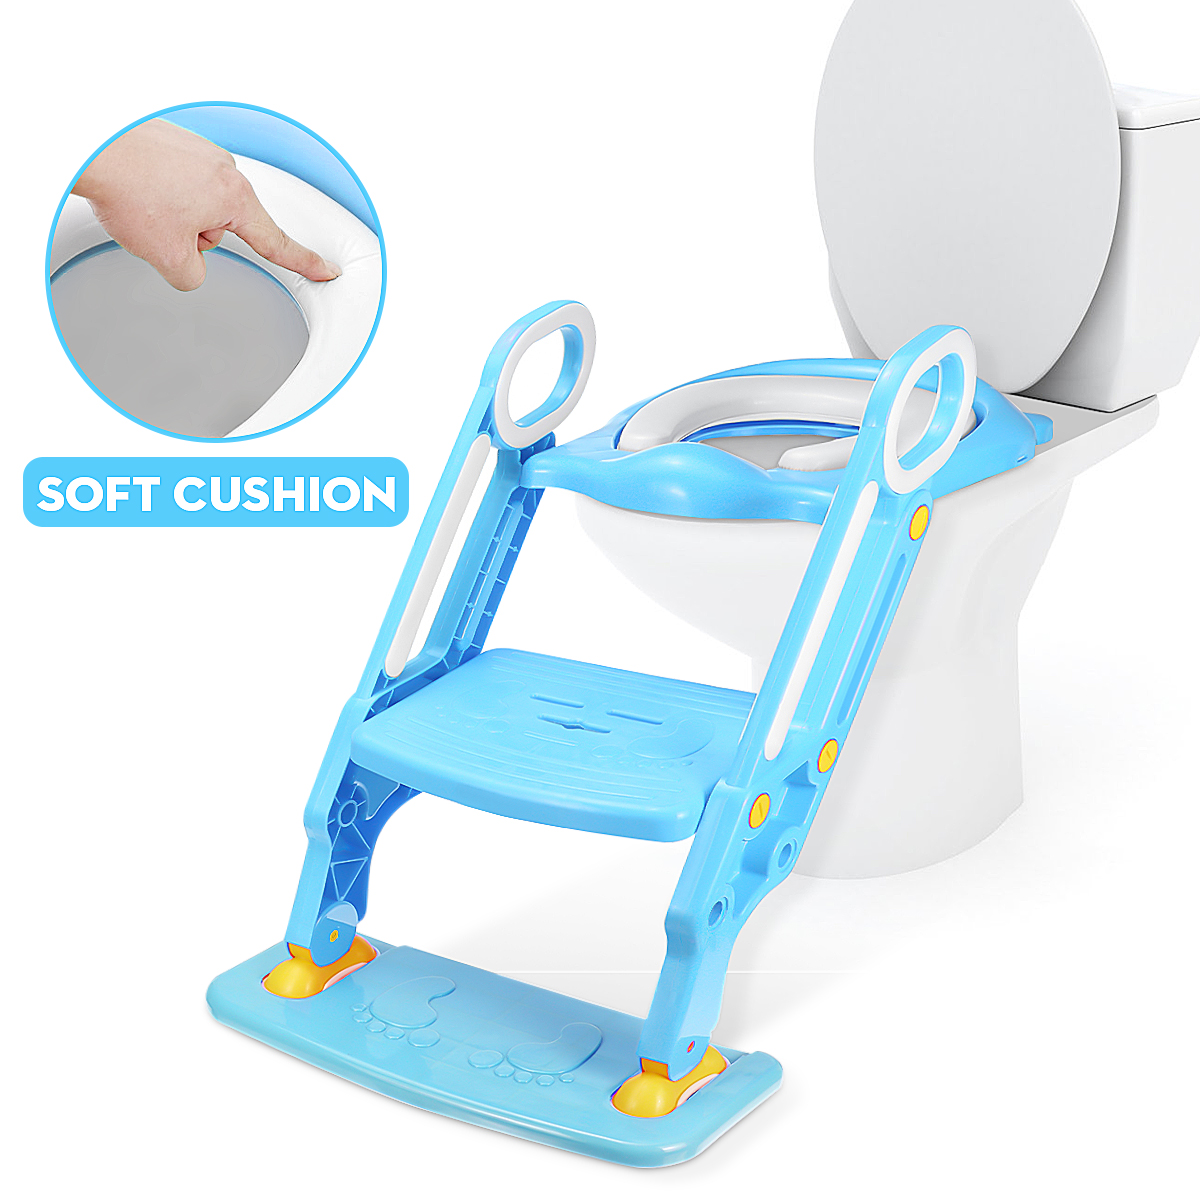 Adjustable Baby Safety Potty Training Seat Chair Foldable Kids Toilet Potty Trainer with Step Stool Ladder and Soft Cushion for Toddler Child Baby Boys Girls Toilet Training Seat Blue Green